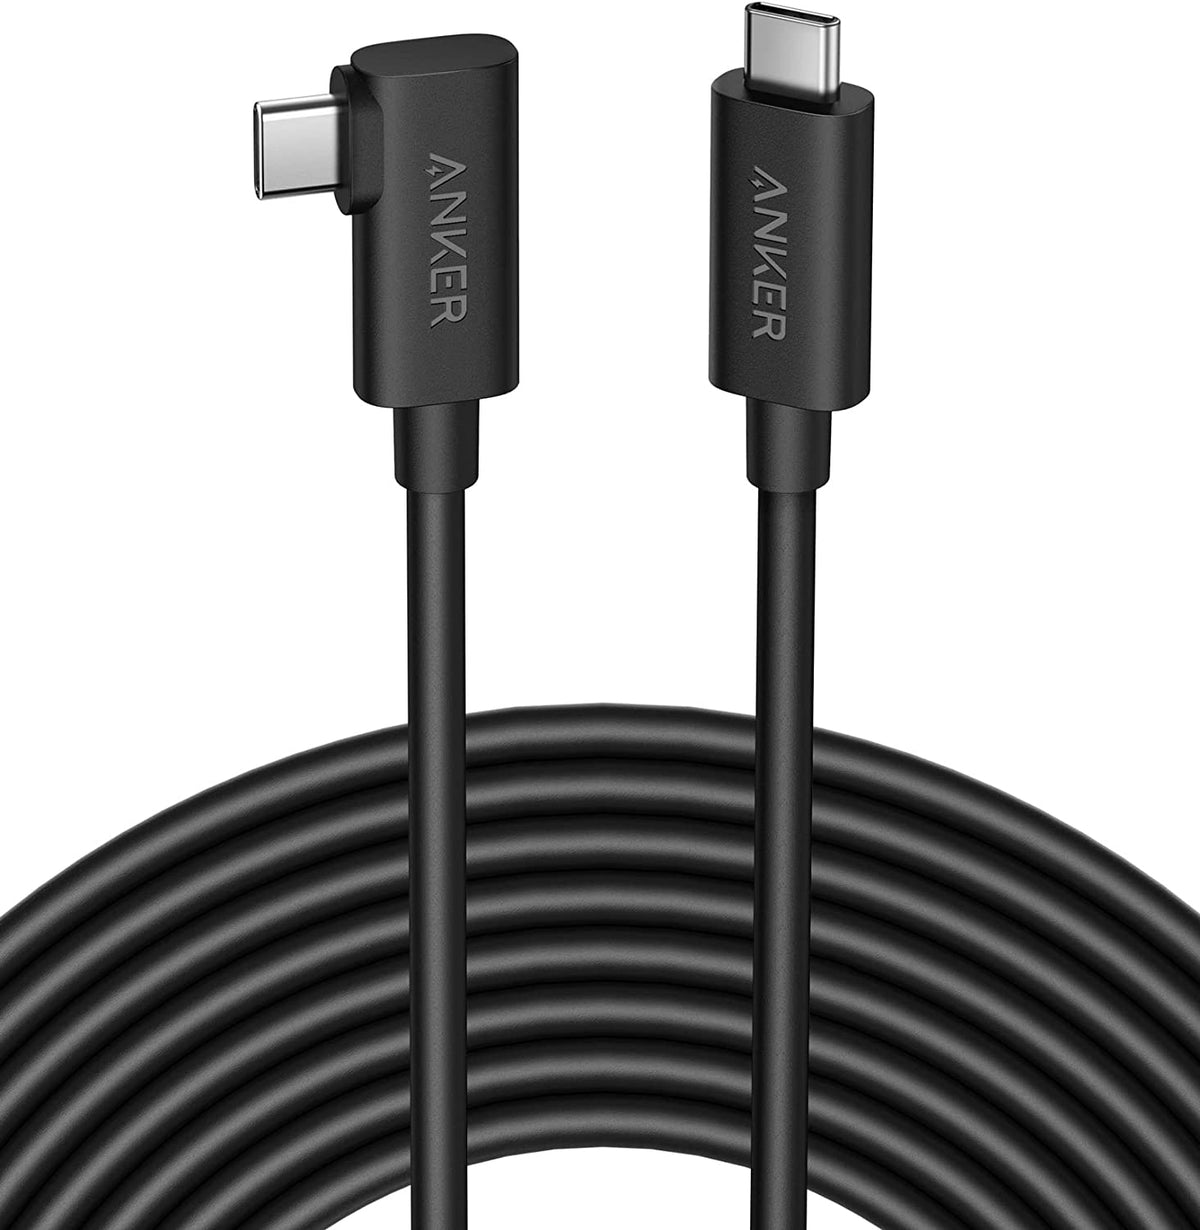 Anker 712 USB-C to USB-C Cable (16 ft Fiber Optic), 10 Gbps High-Speed Data Transfer Charging Cord